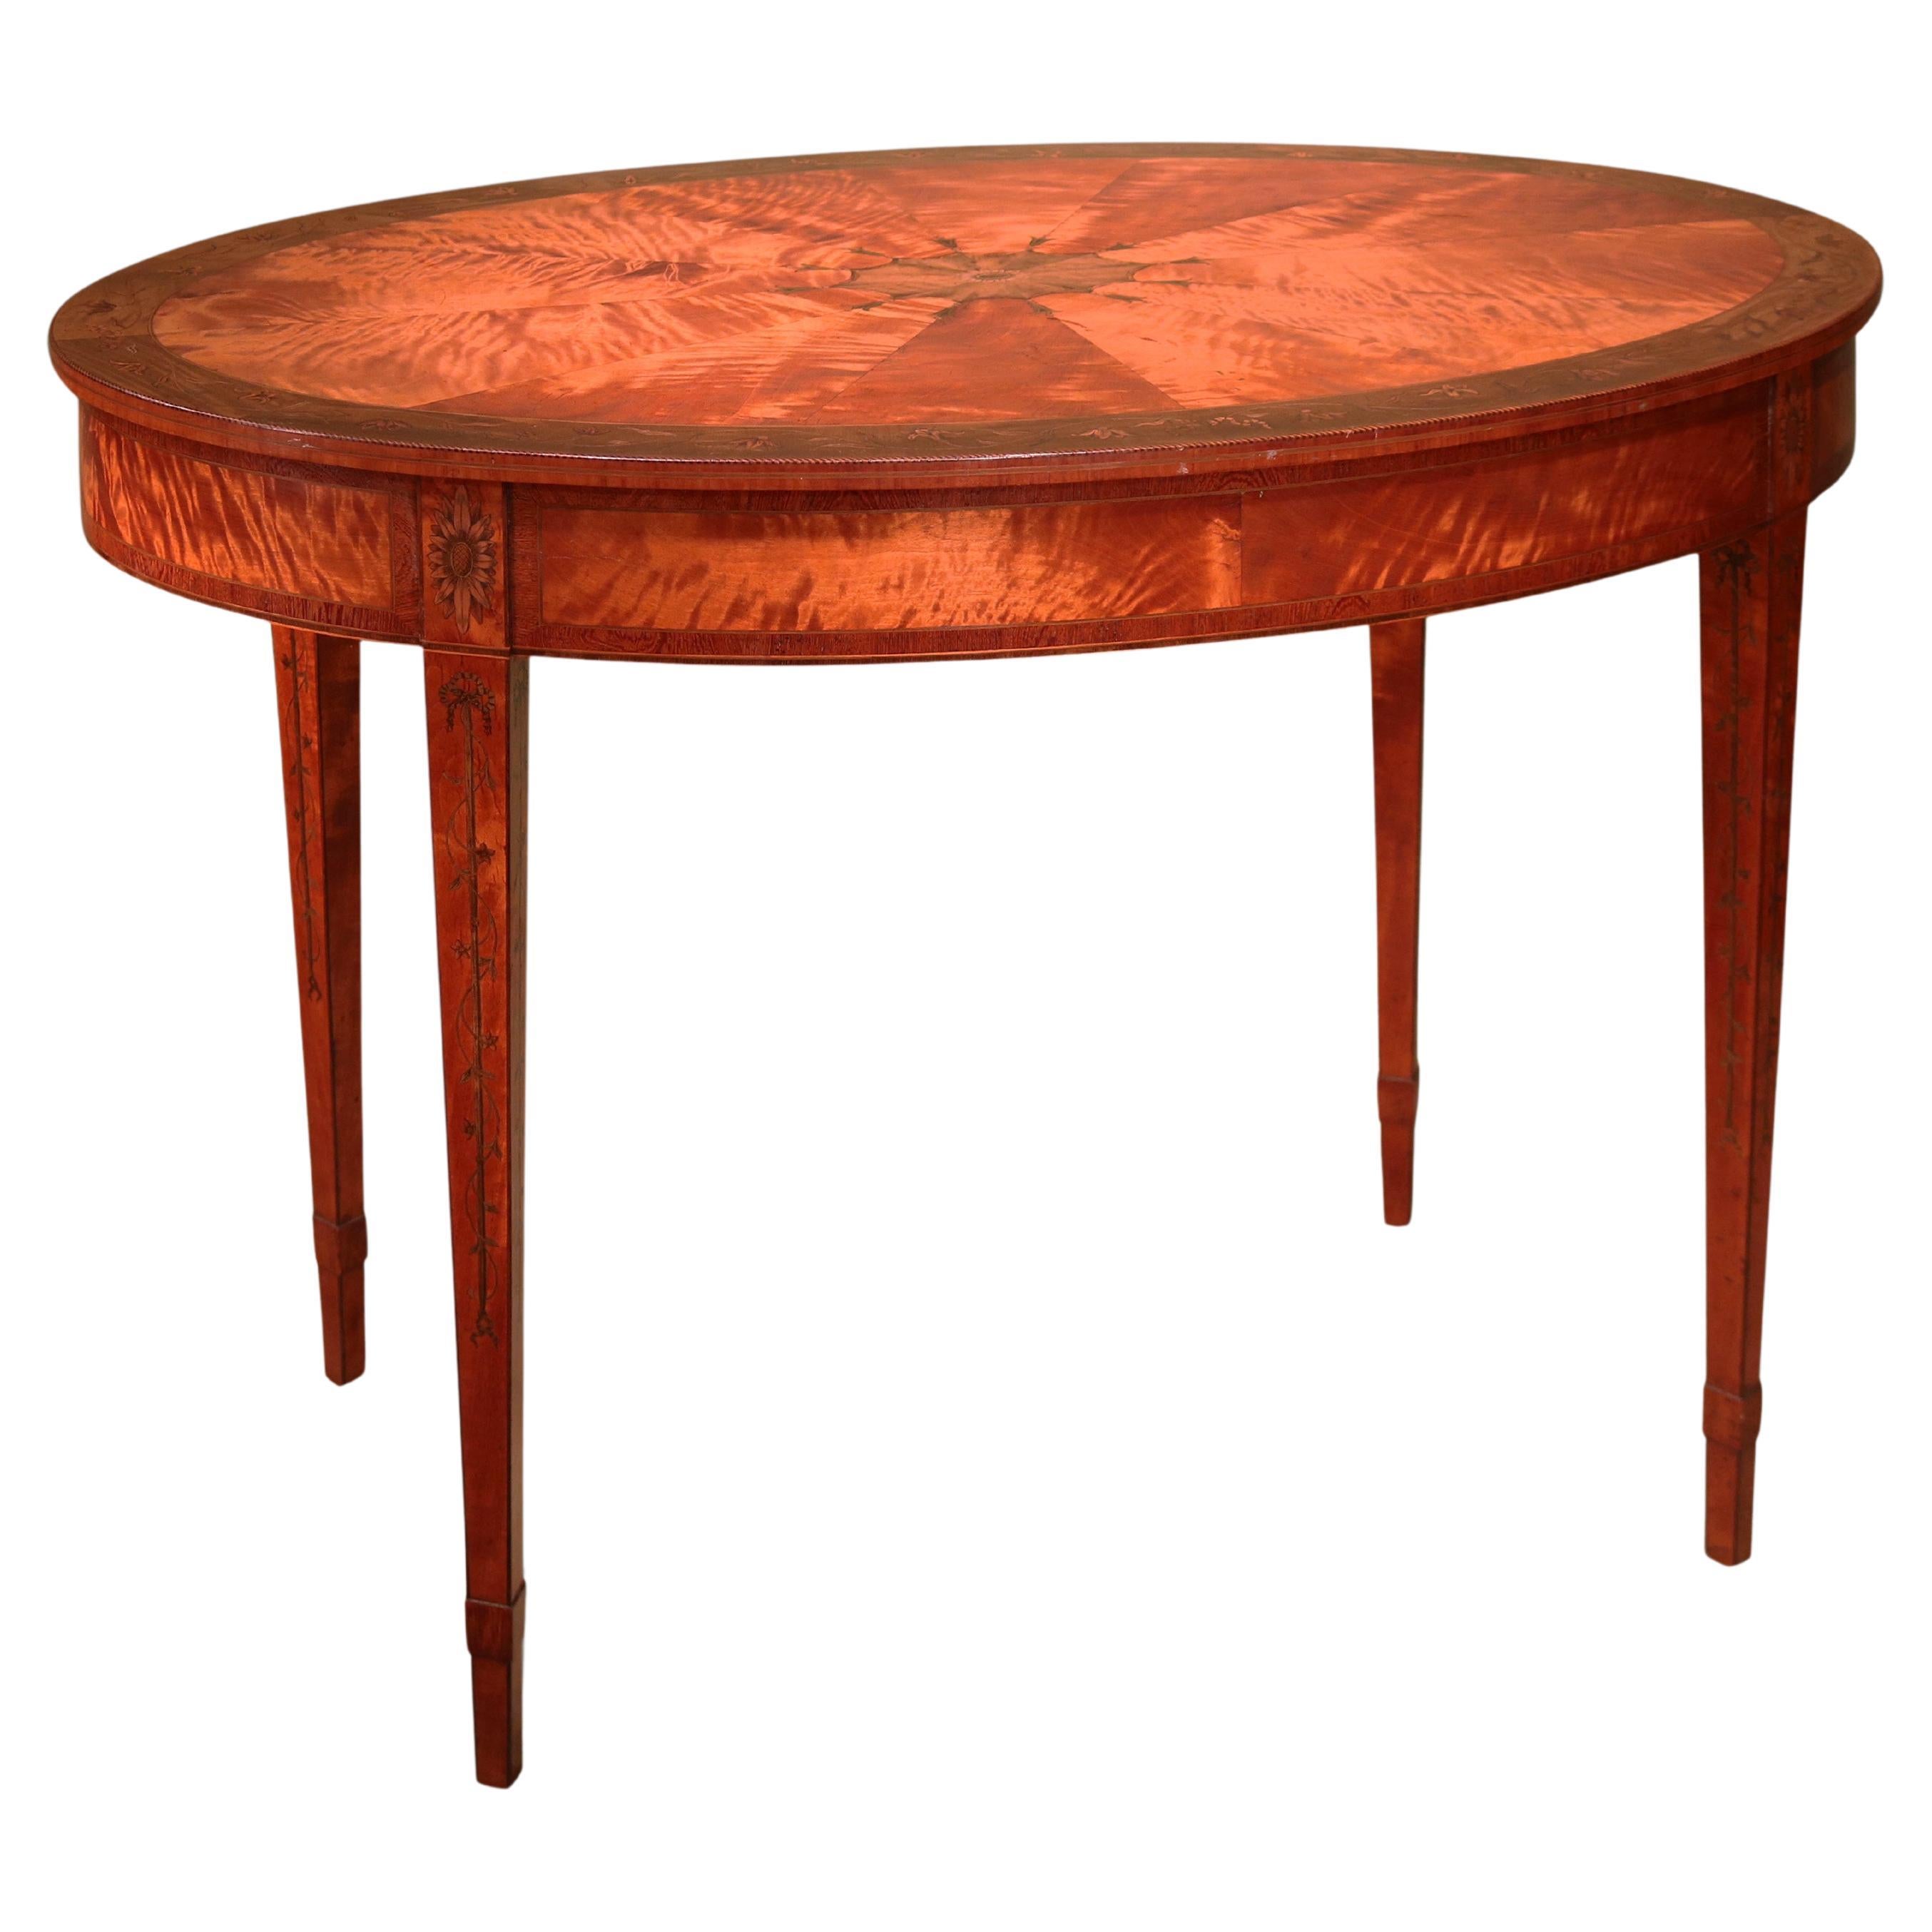 Antique 19th century satinwood oval occasional table